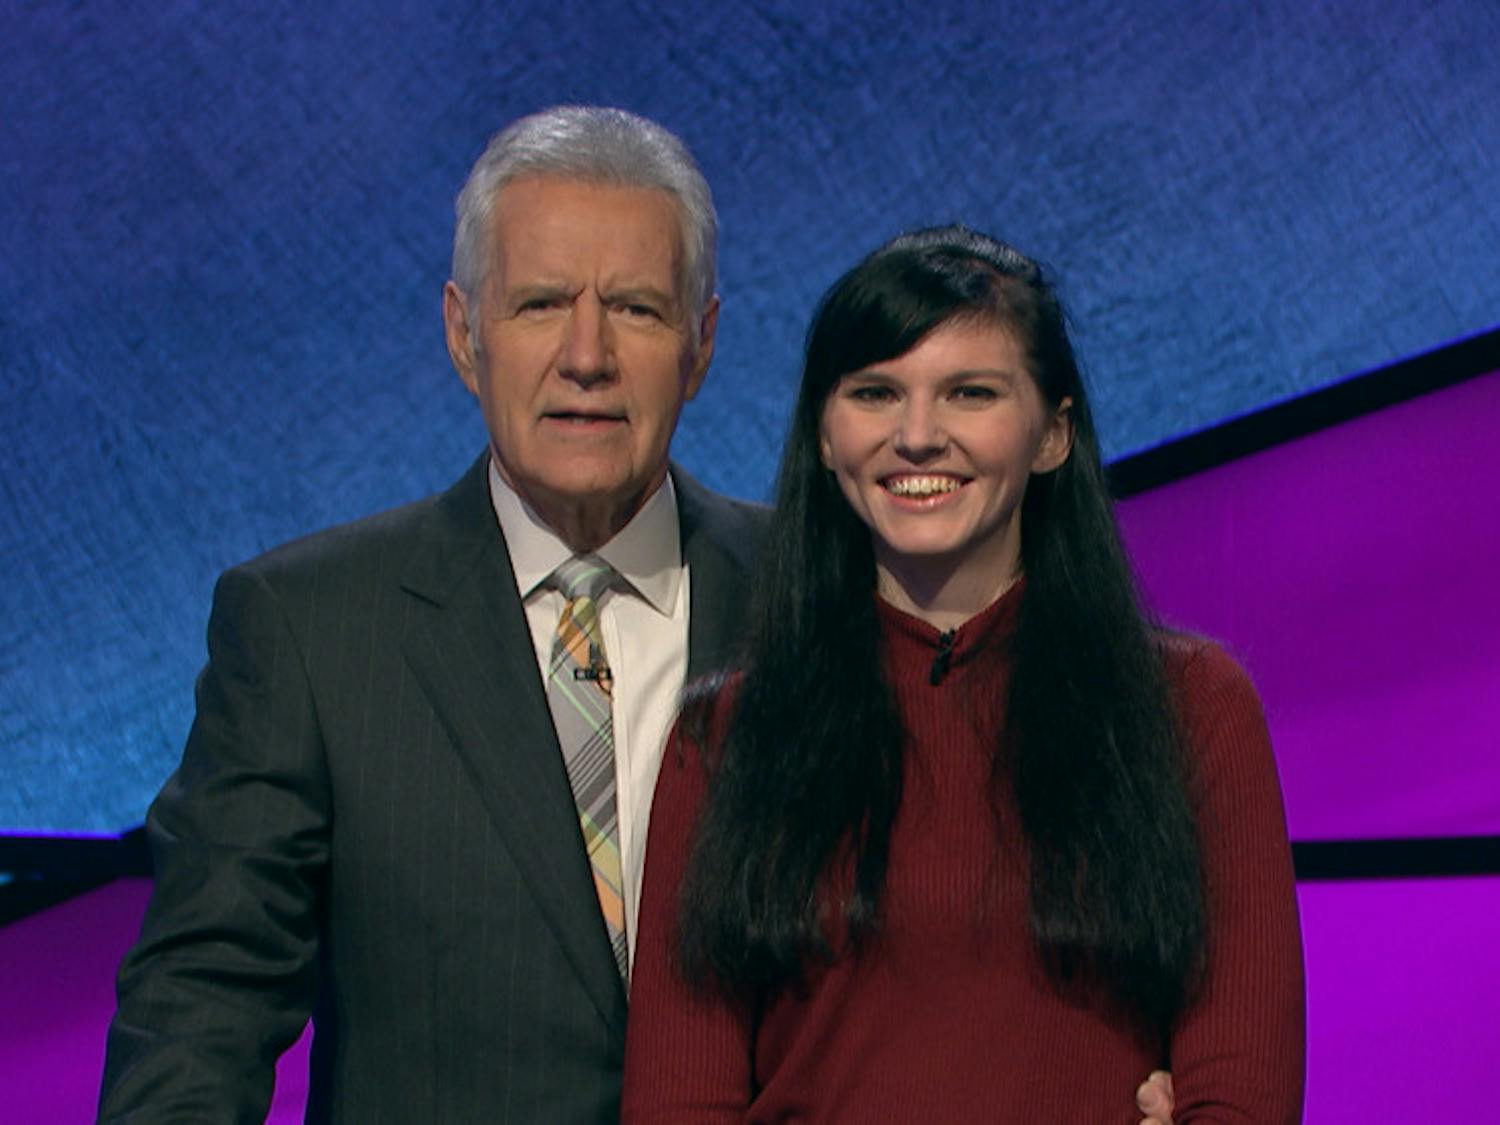 Jade Ryan, a 25-year-old UF English senior, will appear on an episode of “Jeopardy!,” a trivia television show, at 7:30 p.m. on Tuesday, Feb. 5.